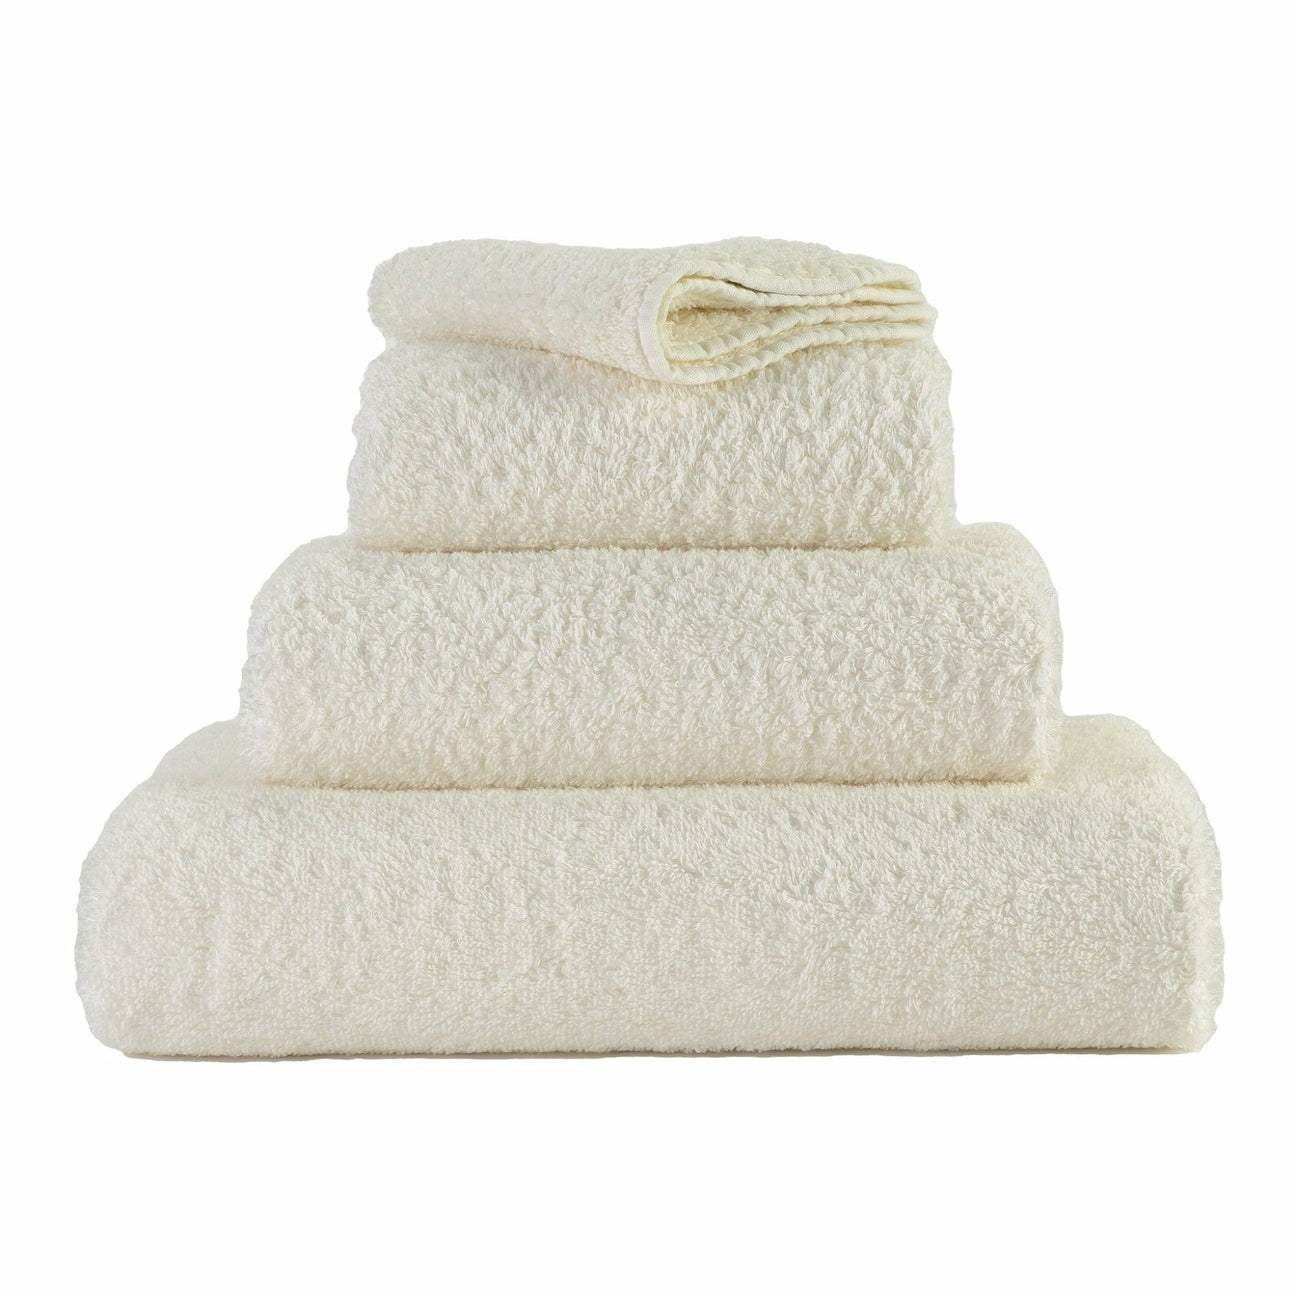 Shop Top Designer Luxury Bath Towels For Sale [Free Shipping]